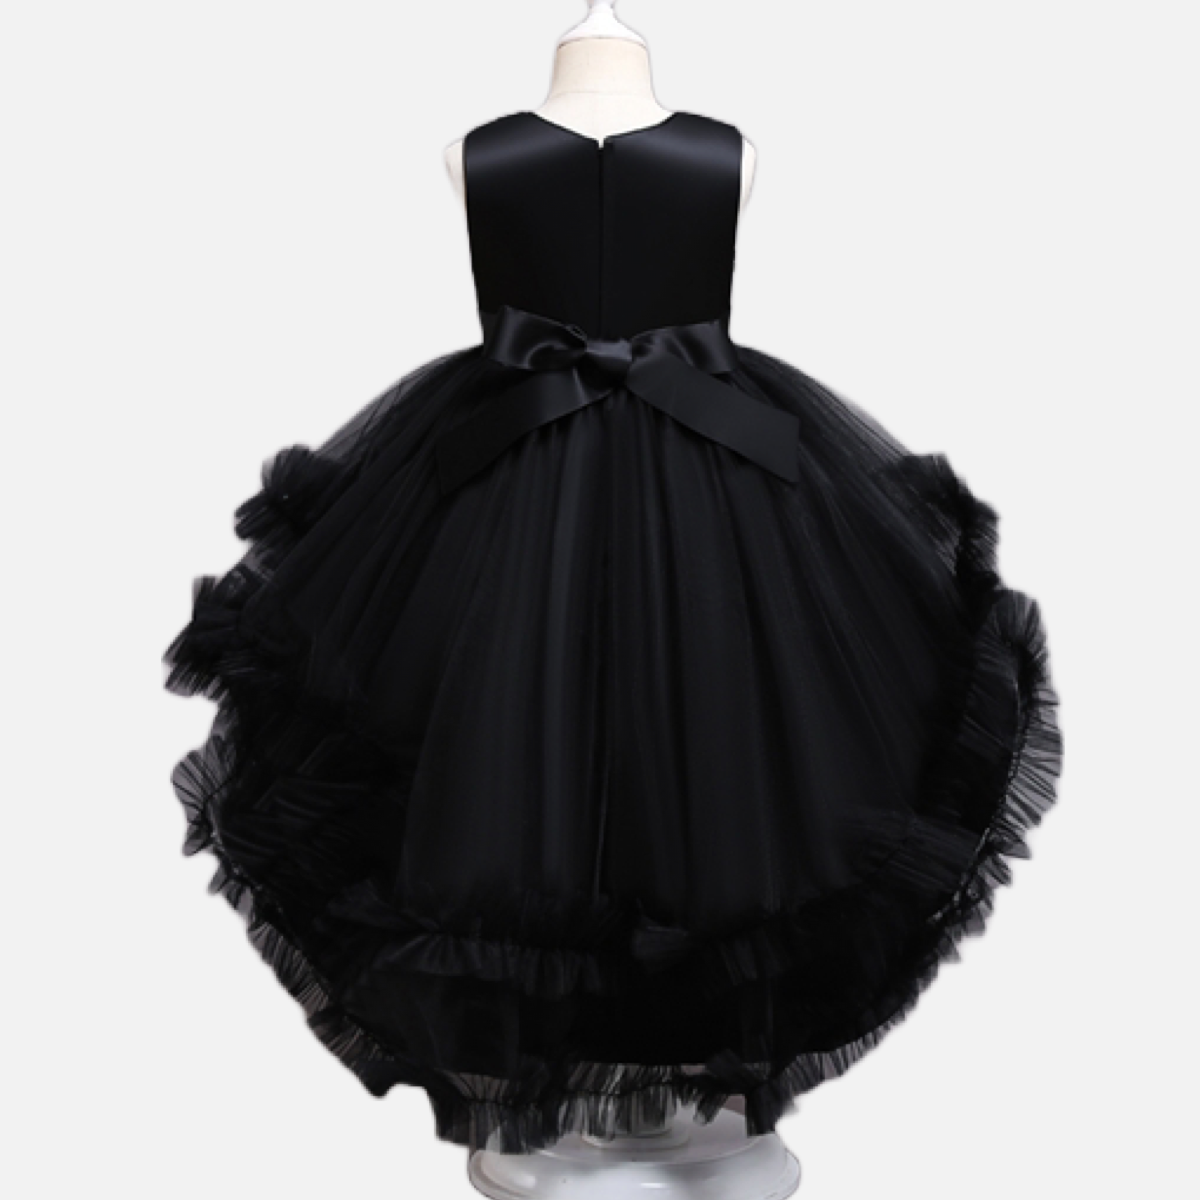 Black Tulle High Low Dress w/ Embroidered Sequin Flowers